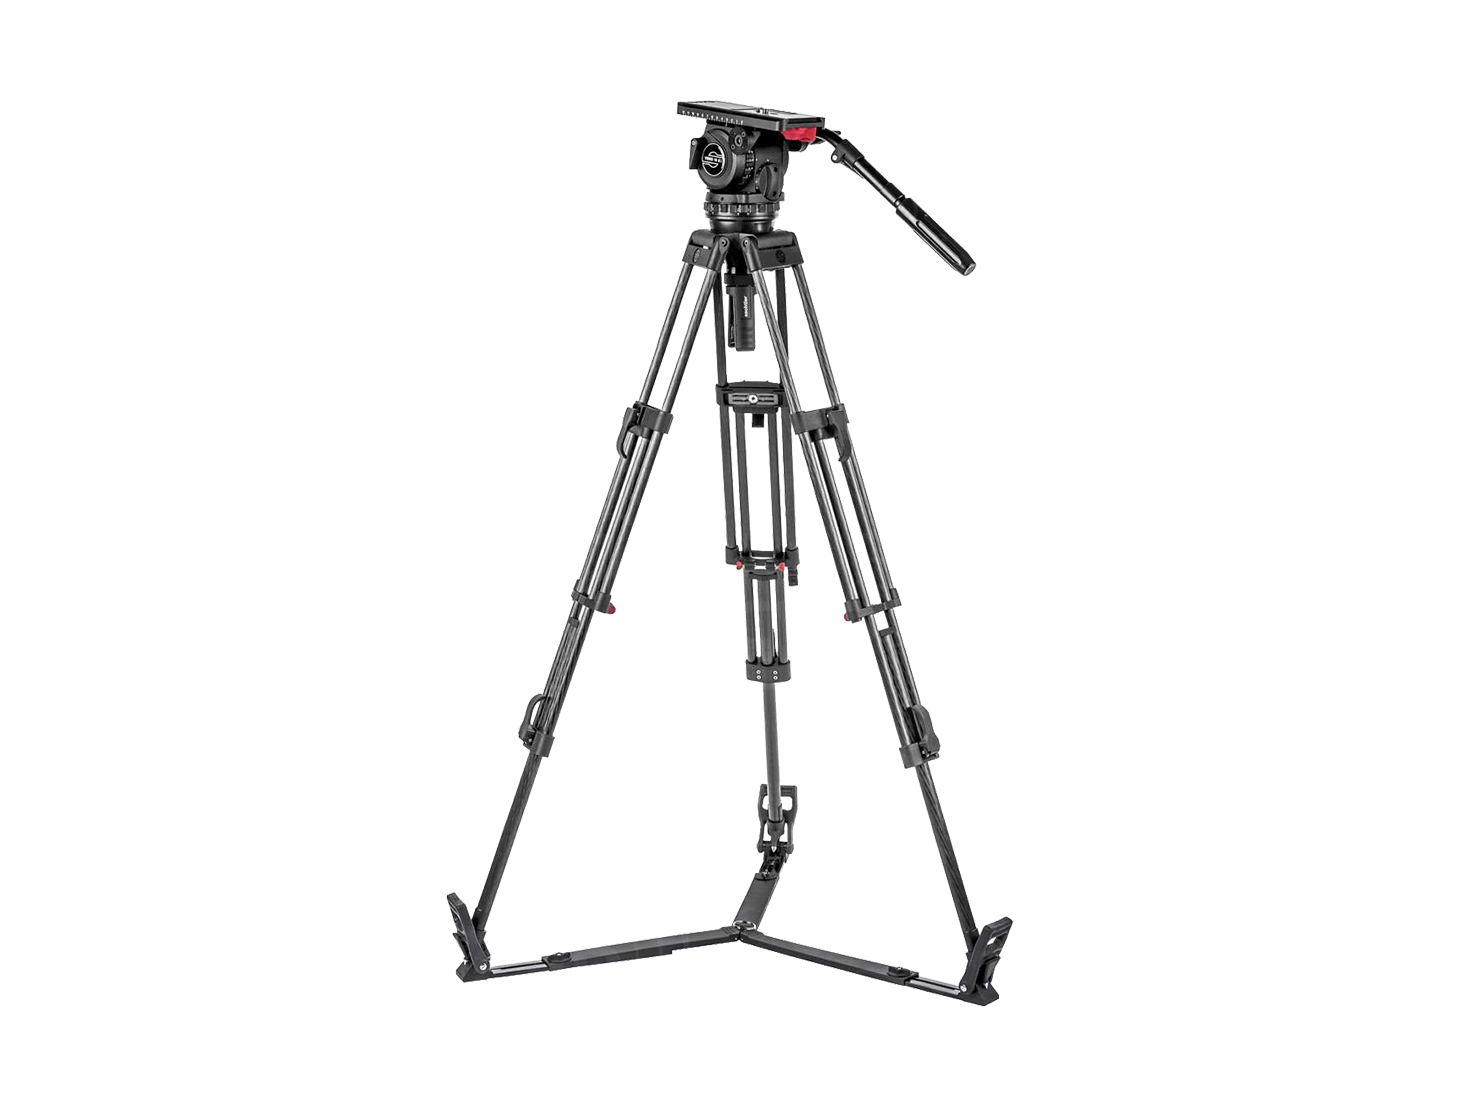 A photo of Sachtler Video 18P Tripod for hire in London